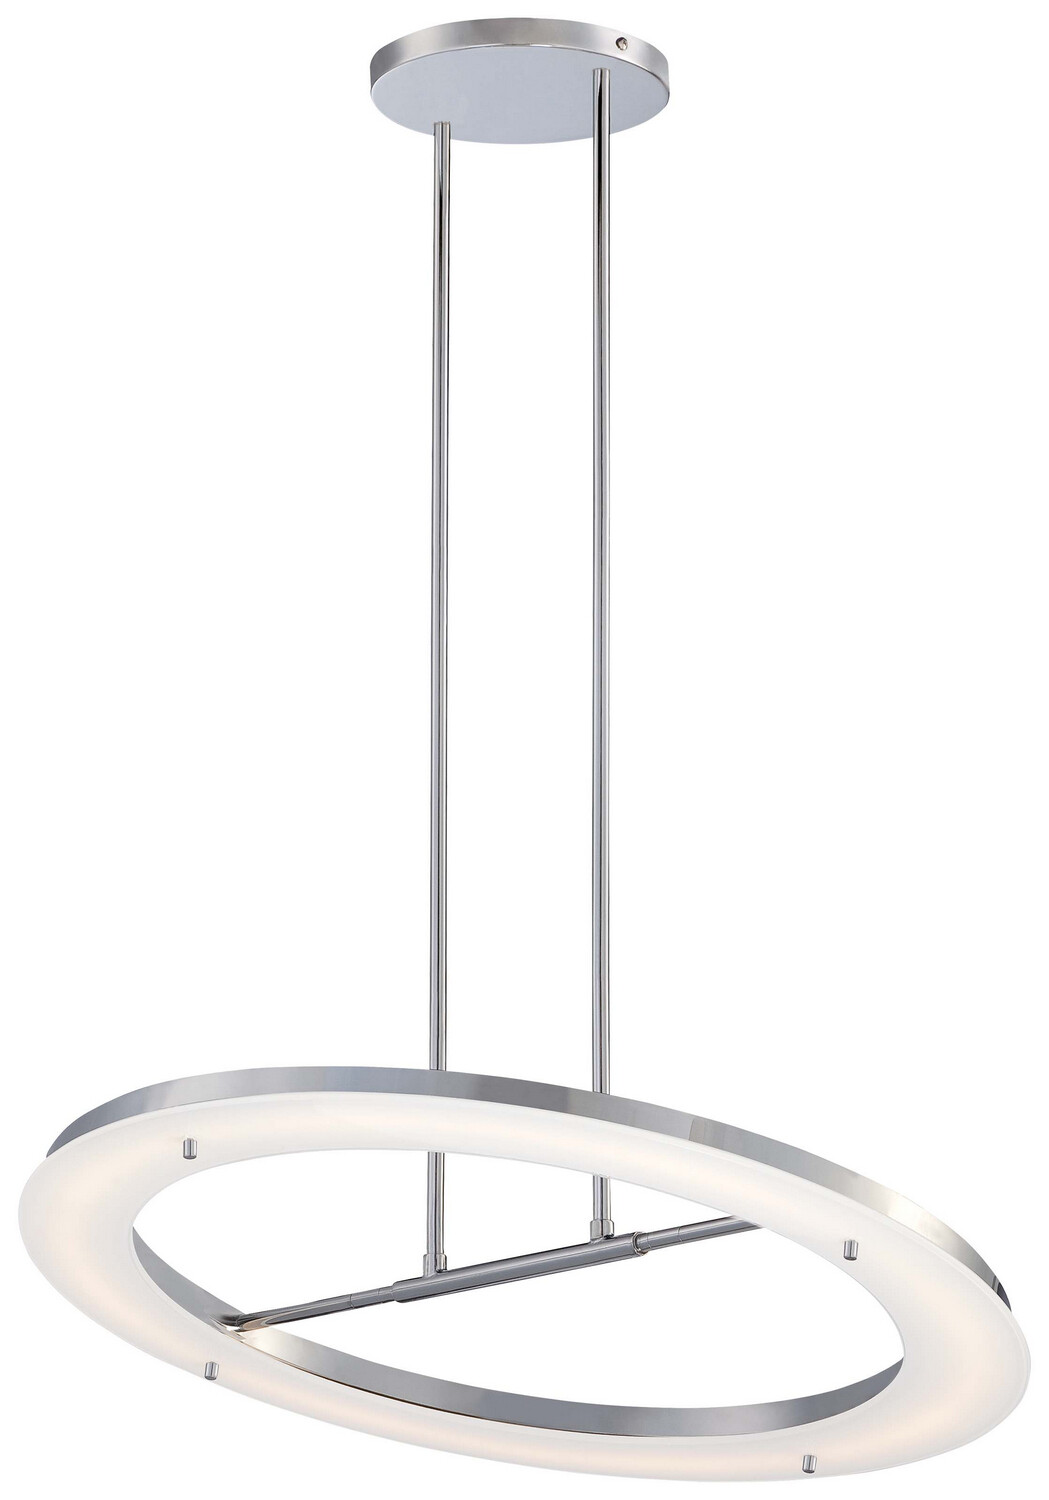 Twist & Shout Chrome LED Pendant (DISPLAY ONLY)